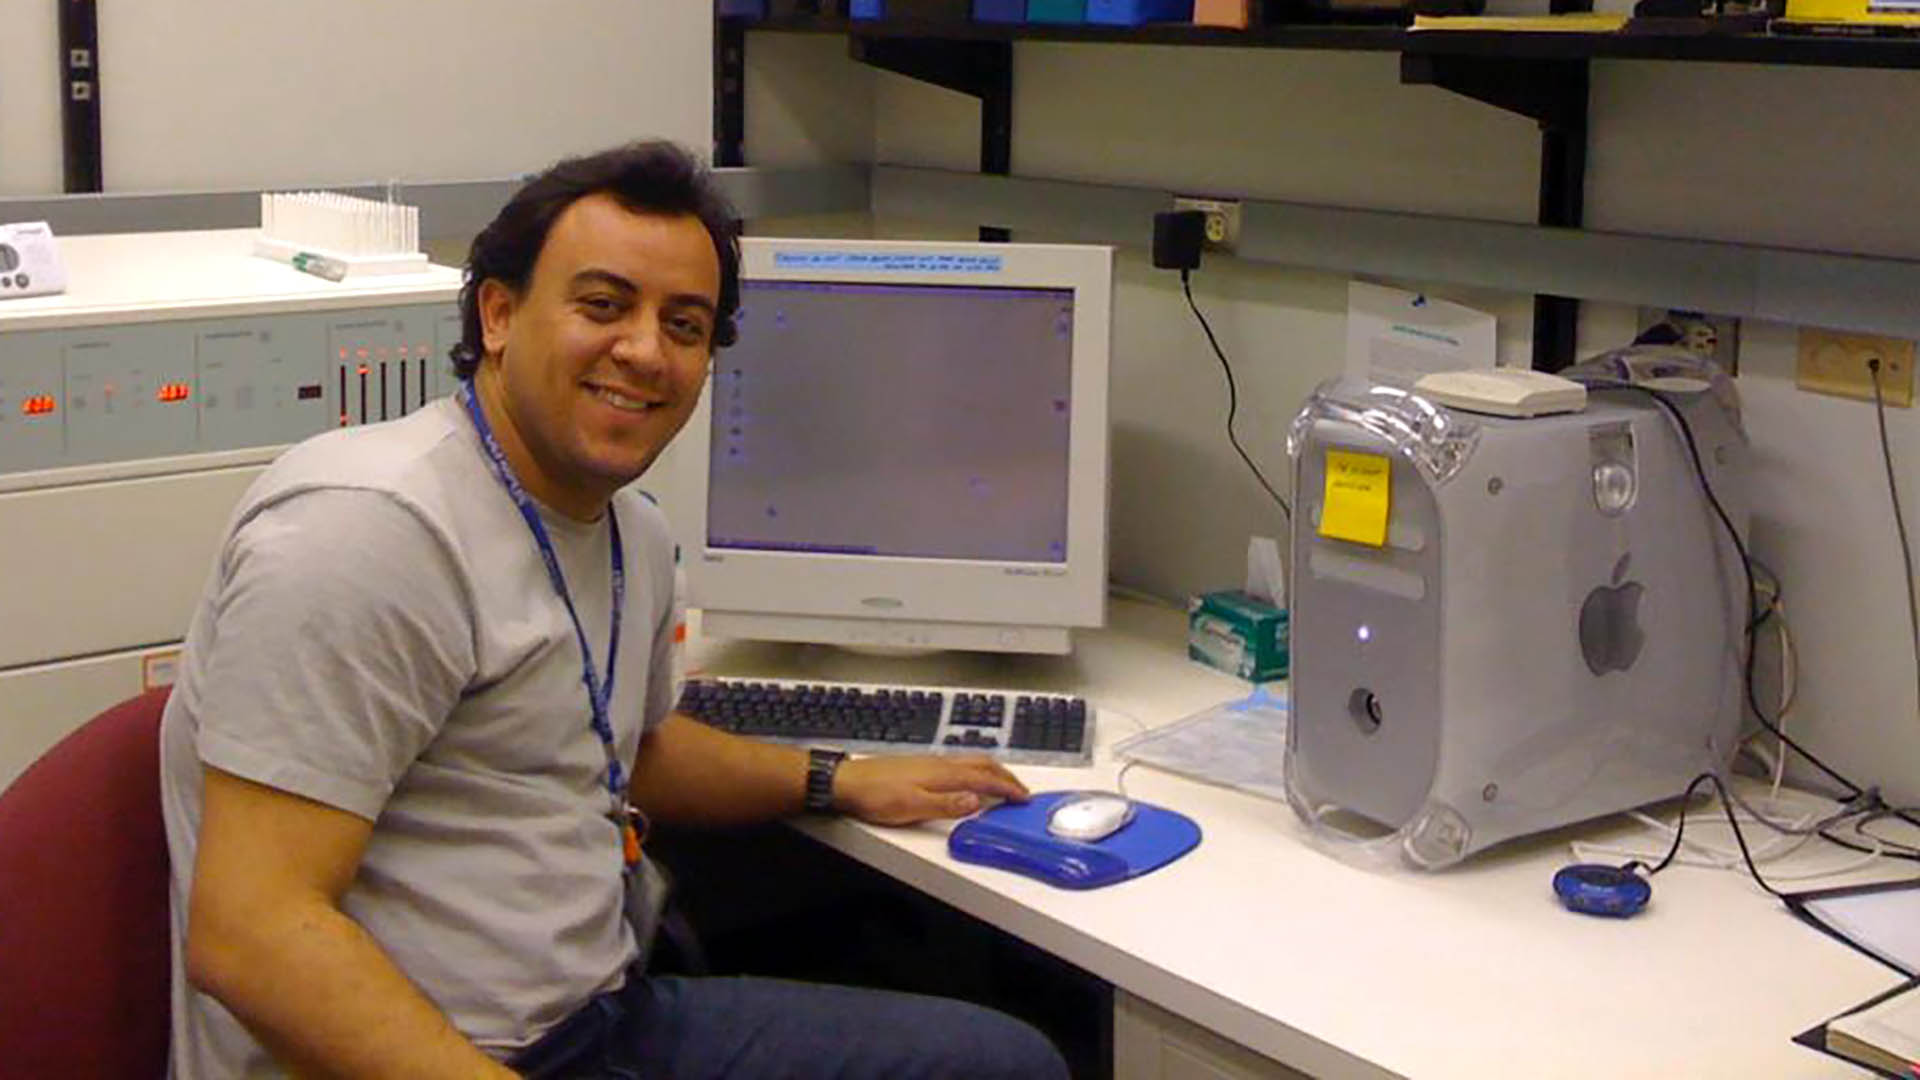 Biologist Gustavo B. Menezes smiles at the camera while sitting at a desk with an older computer.